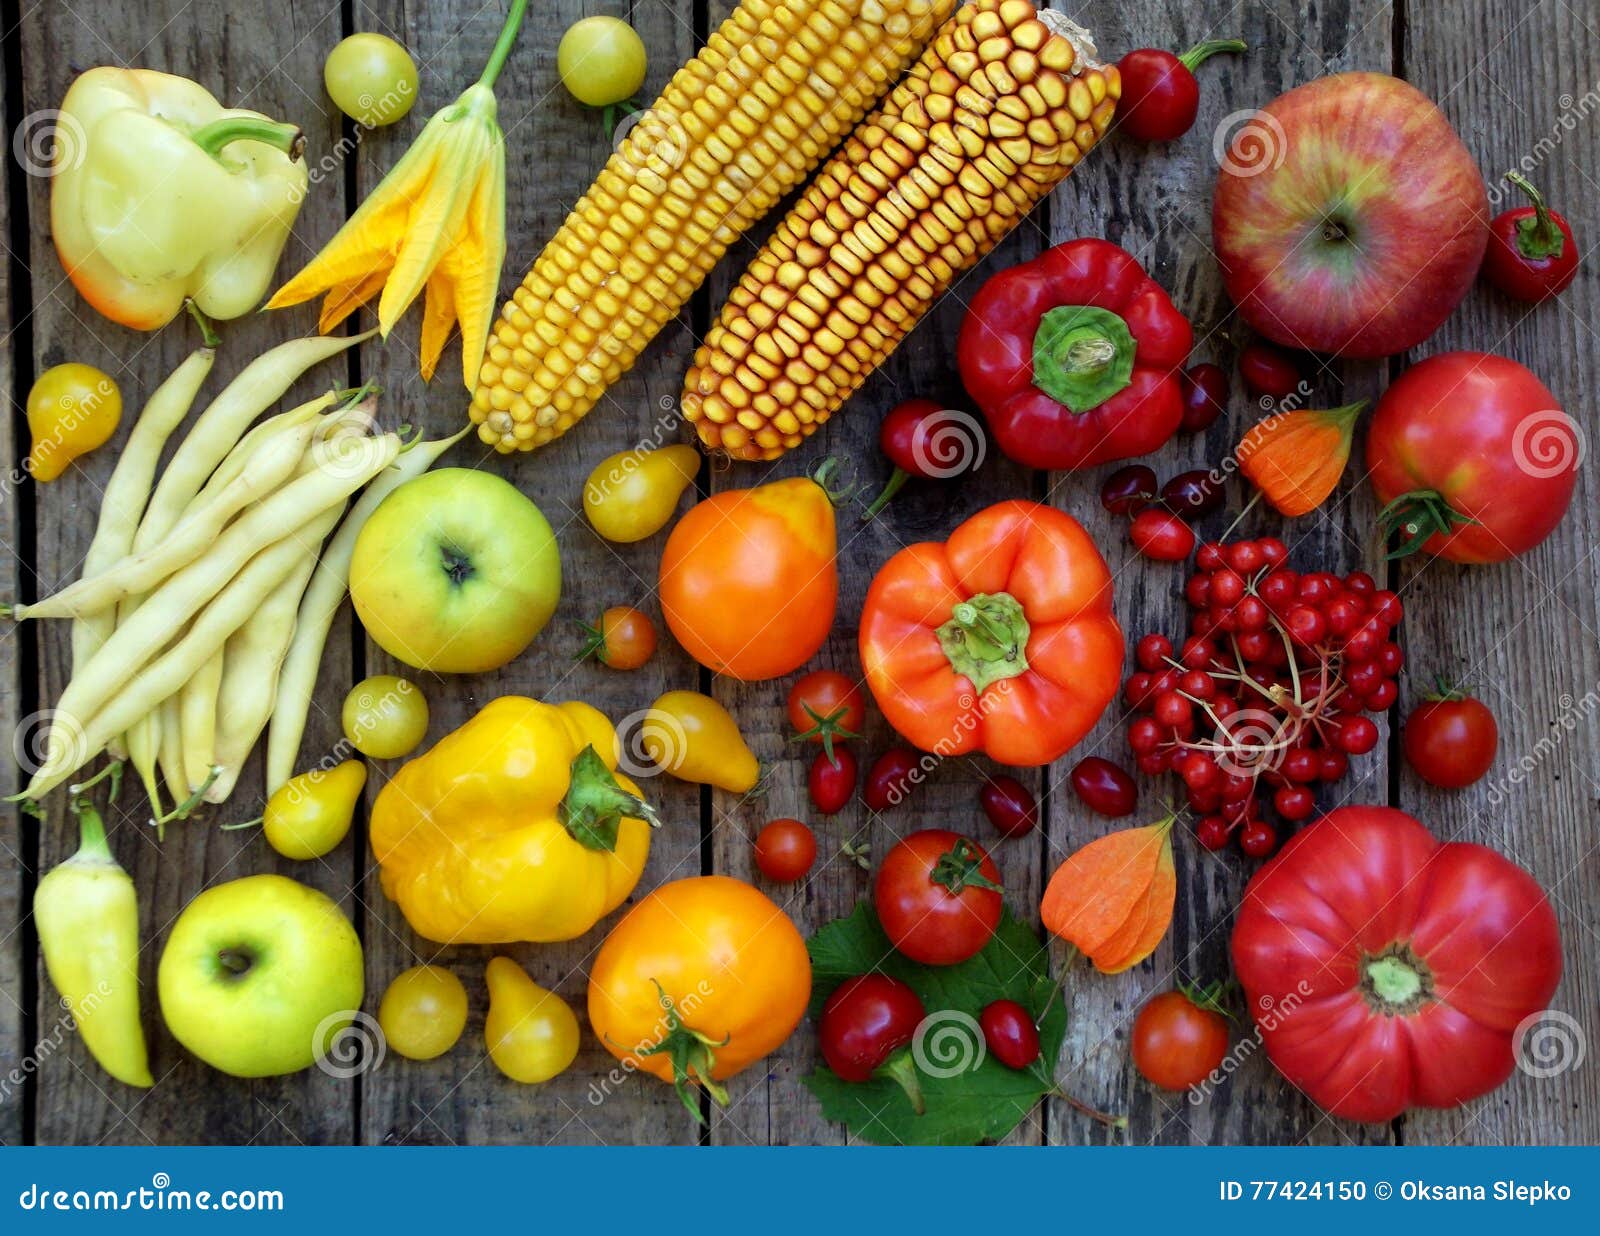 Yellow, Orange and Red Fruits and Vegetables Stock Photo - Image of ...